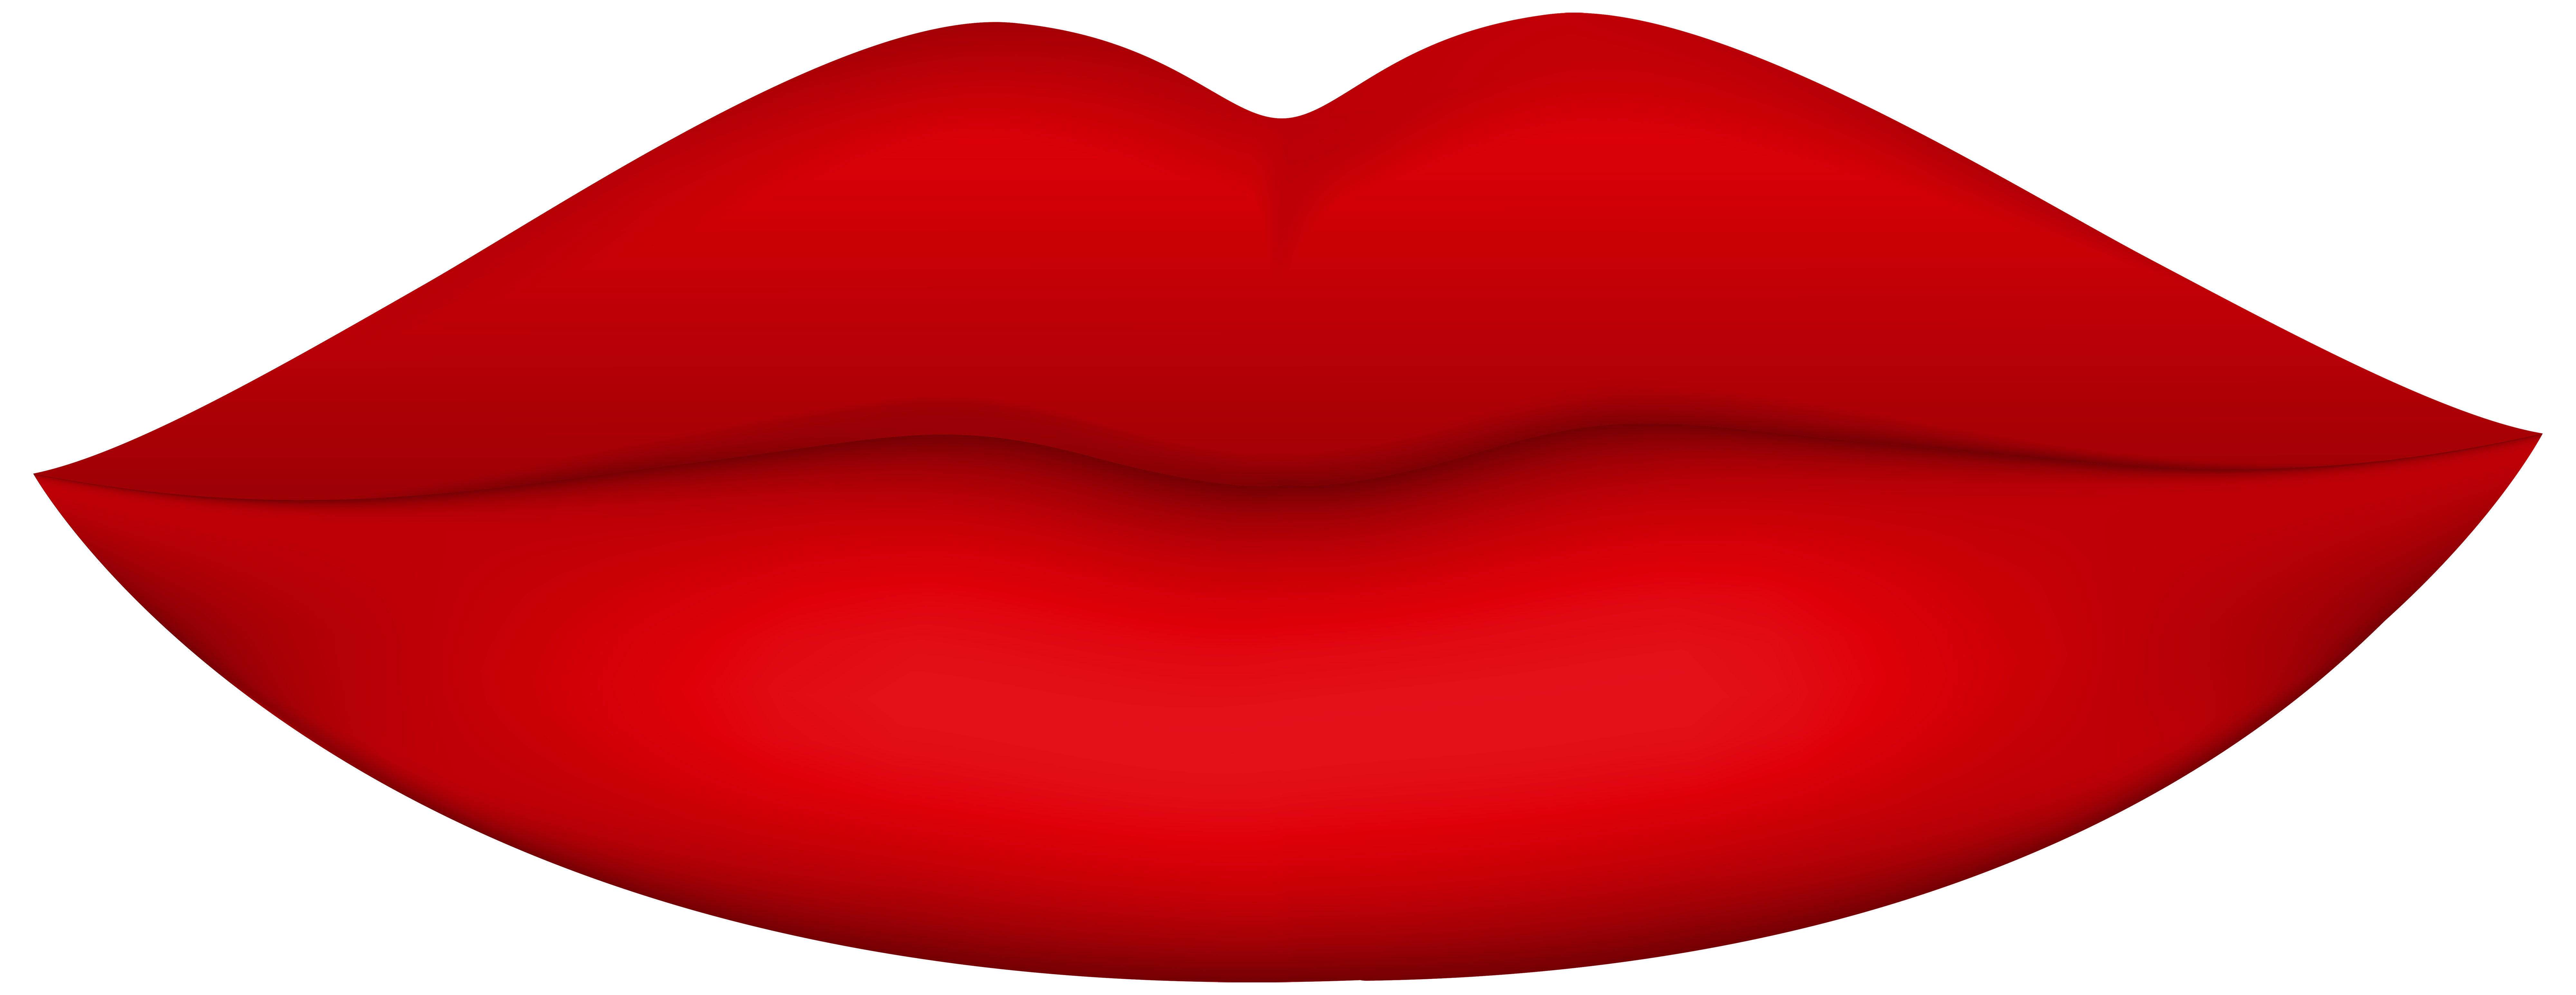 clipart of lips - photo #16